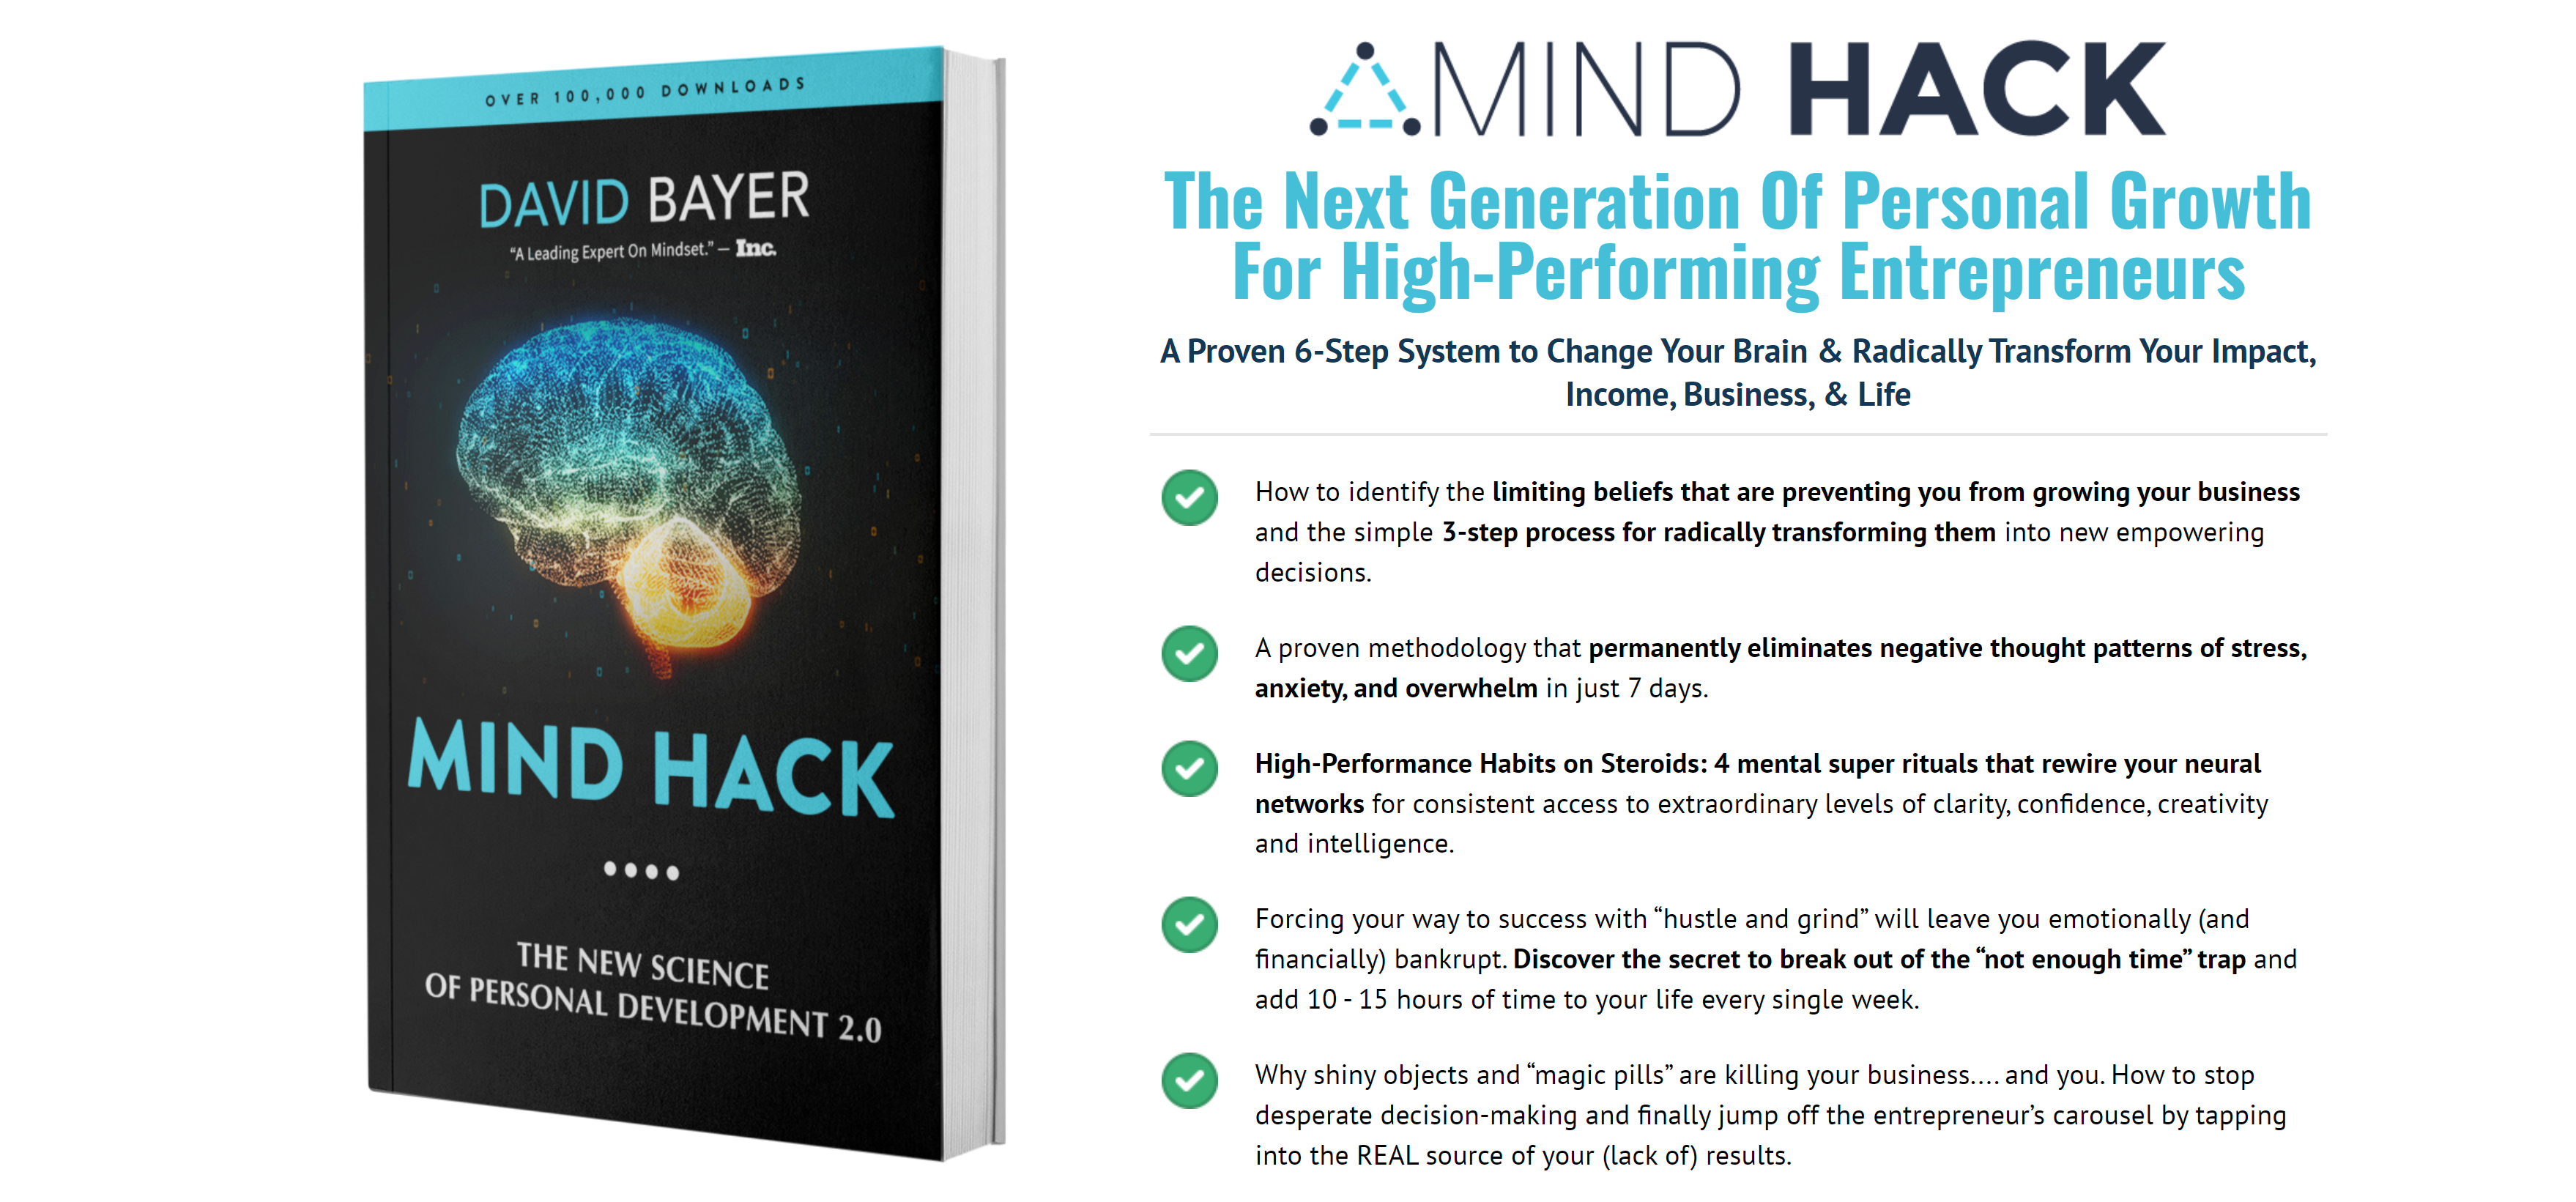 What Is The Mind Hack Program